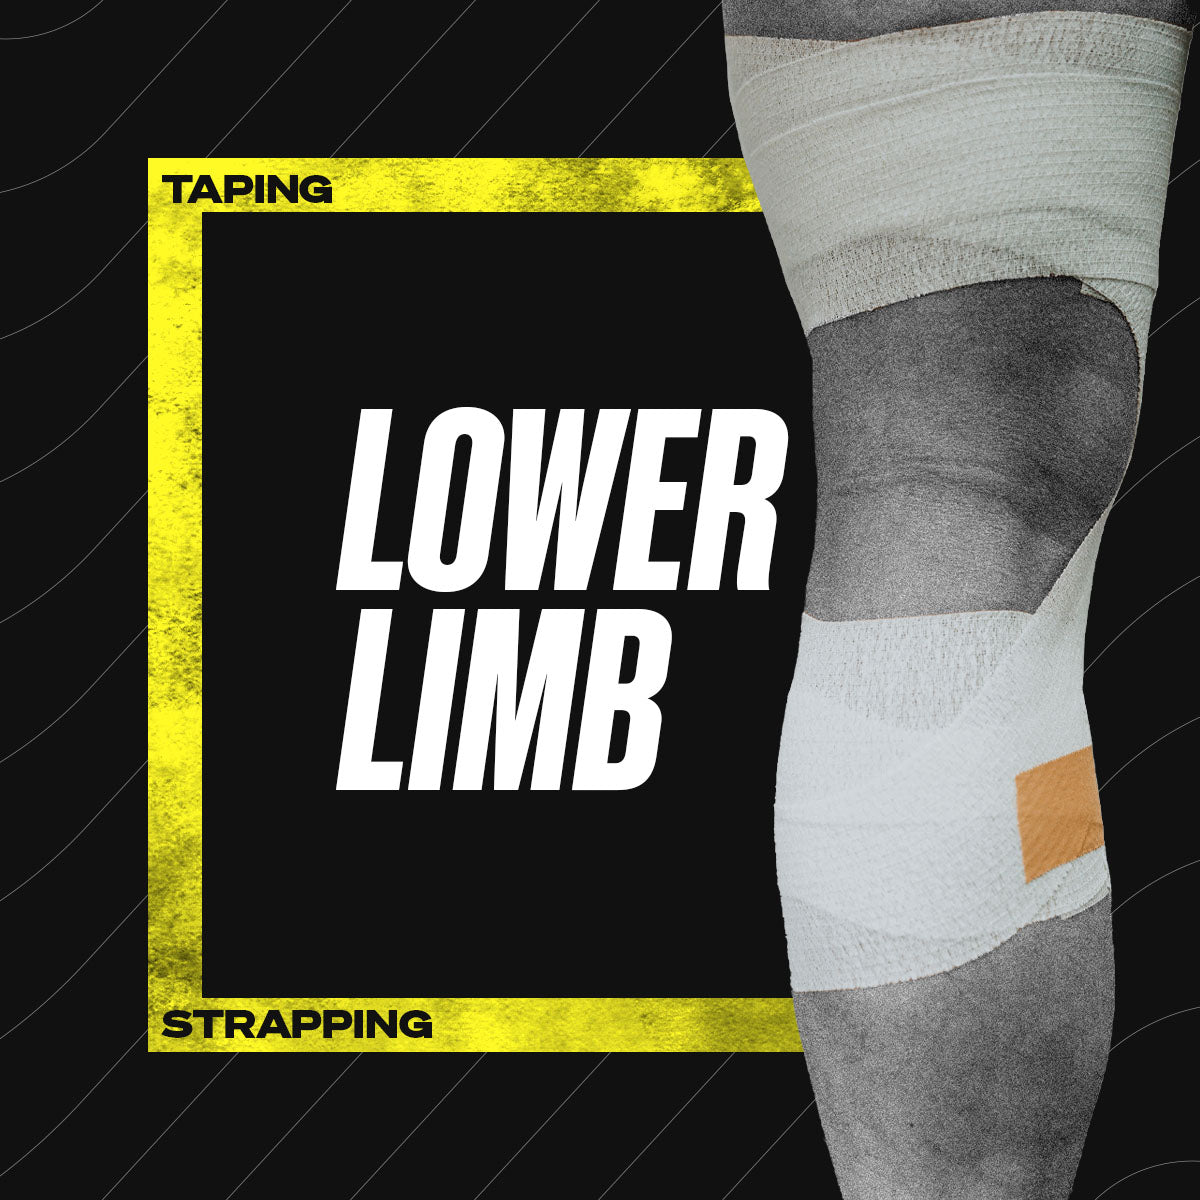 Taping & Strapping for Lower Limb